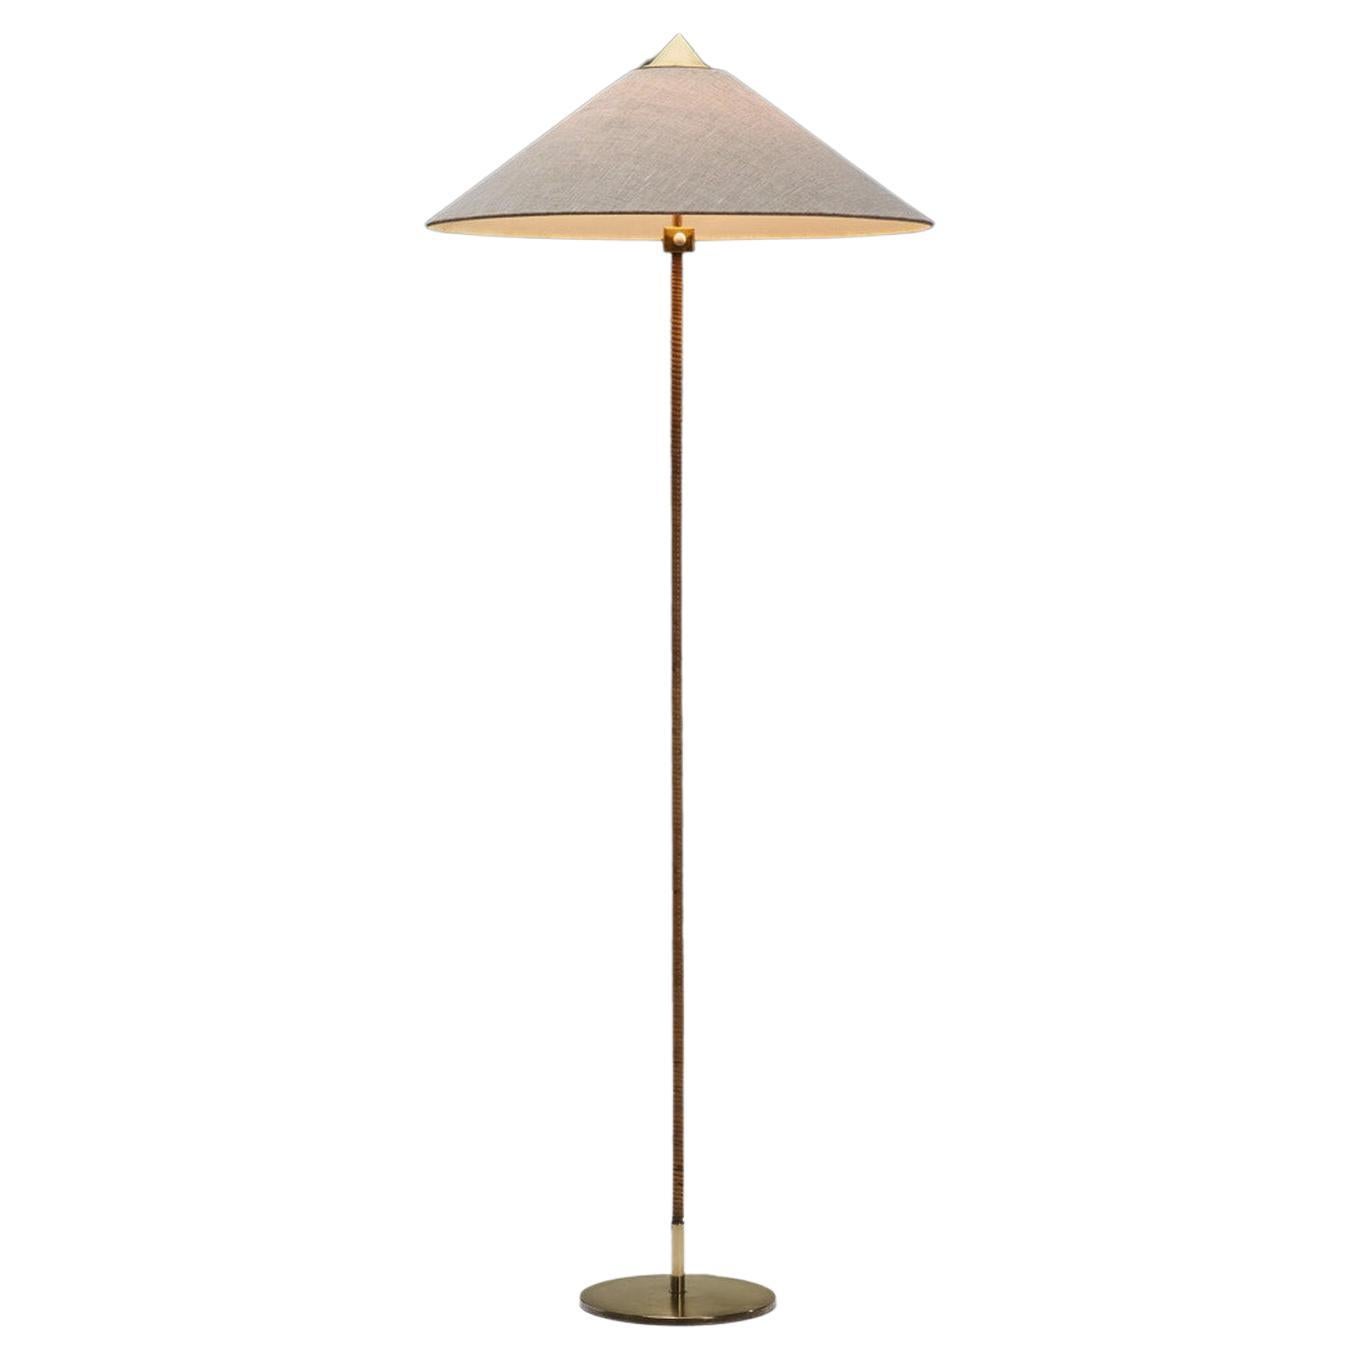 Paavo Tynell "Model 9602" Brass Floor Lamp for Taito Oy, Finland, 1950s